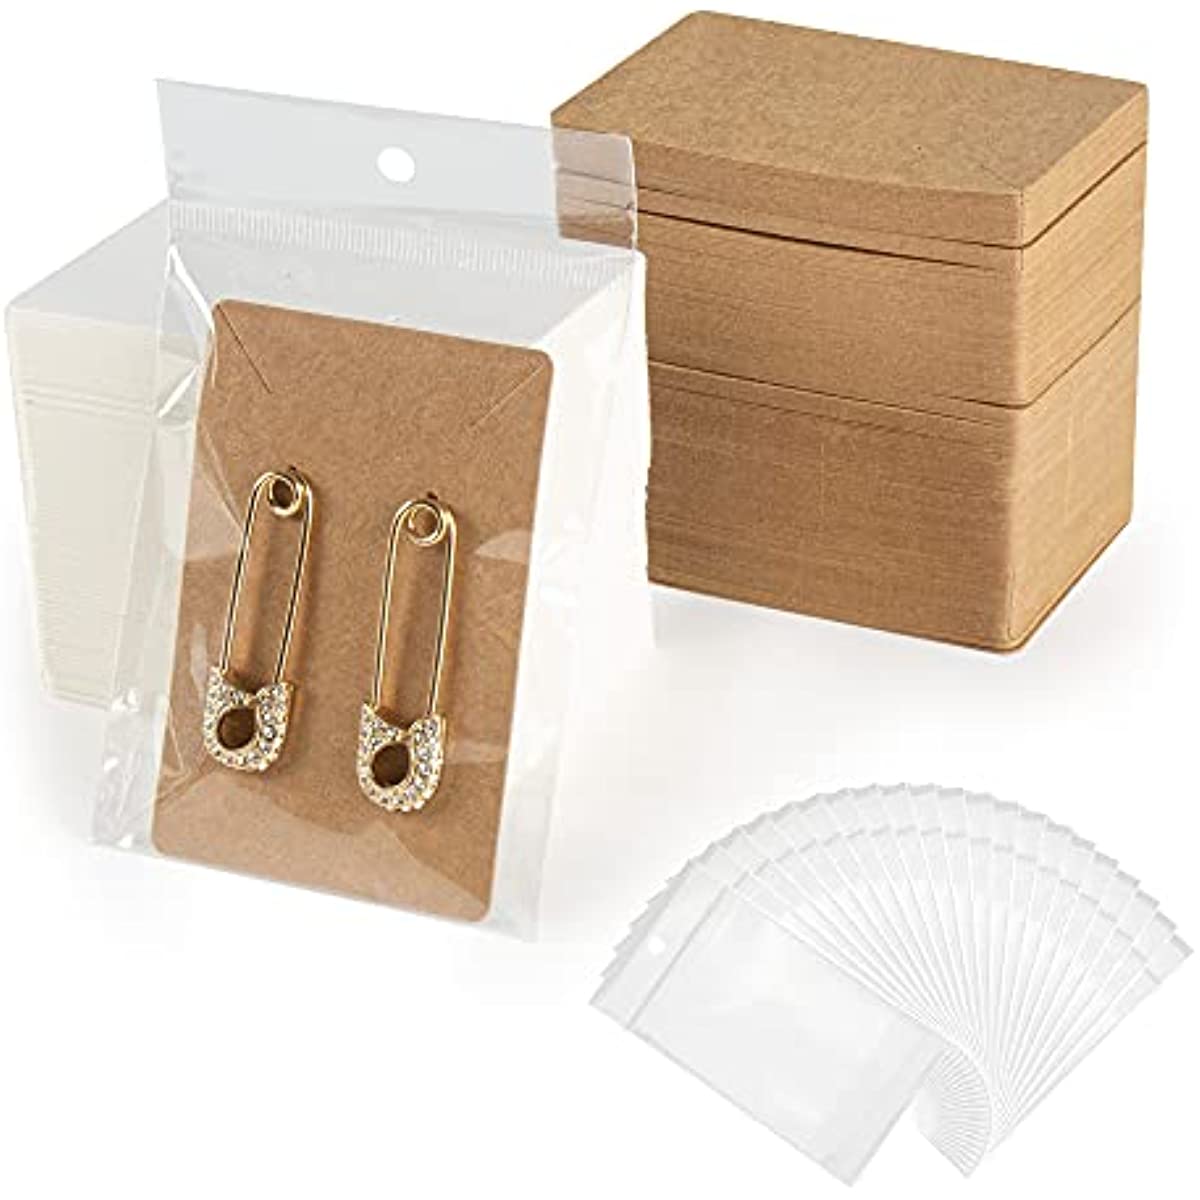 100 Pcs Earring Display Card, Earring Necklace Display Kraft Paper Cards  with100 Pcs Self-Seal Bags for Ear Studs Earrings and Necklace Jewelry